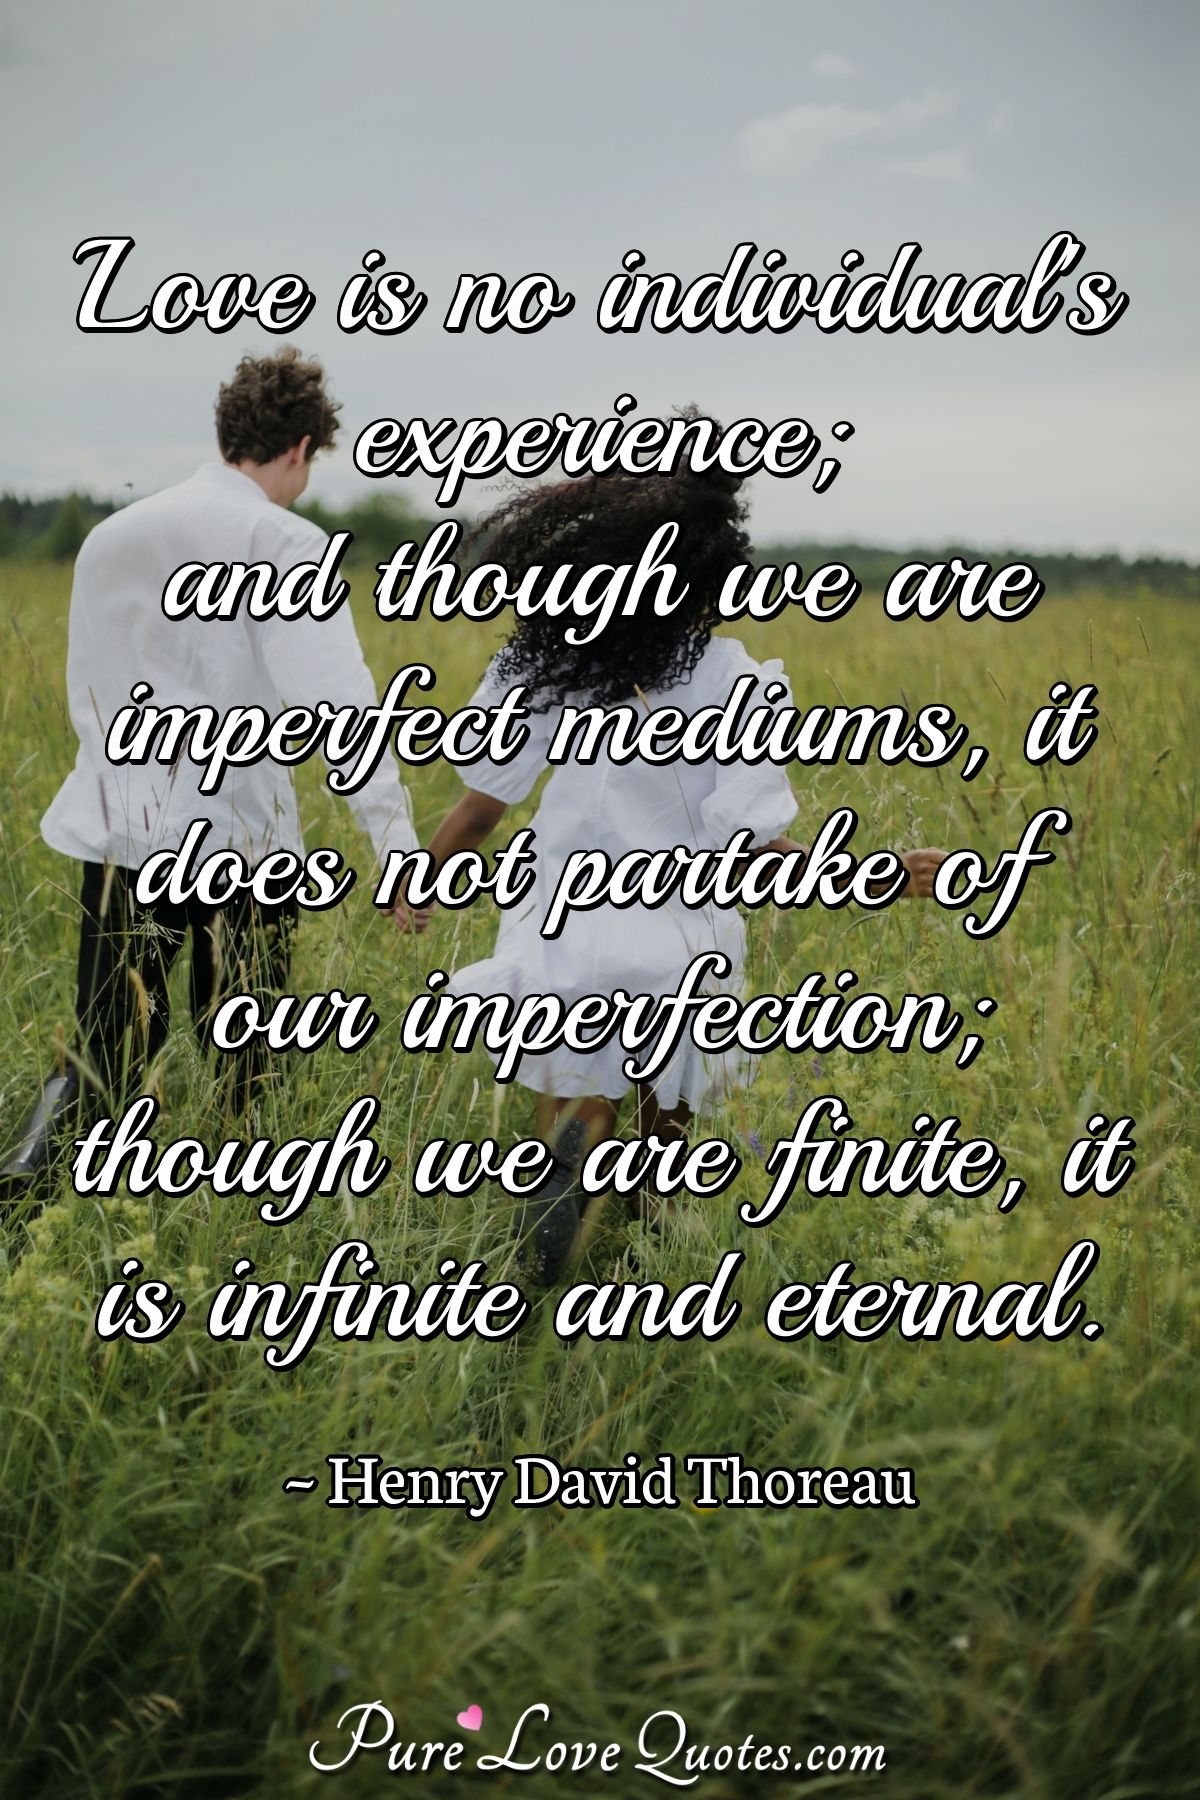 Love is no individual's experience; and though we are imperfect mediums, it does not partake of our imperfection; though we are finite, it is infinite and eternal. - Henry David Thoreau